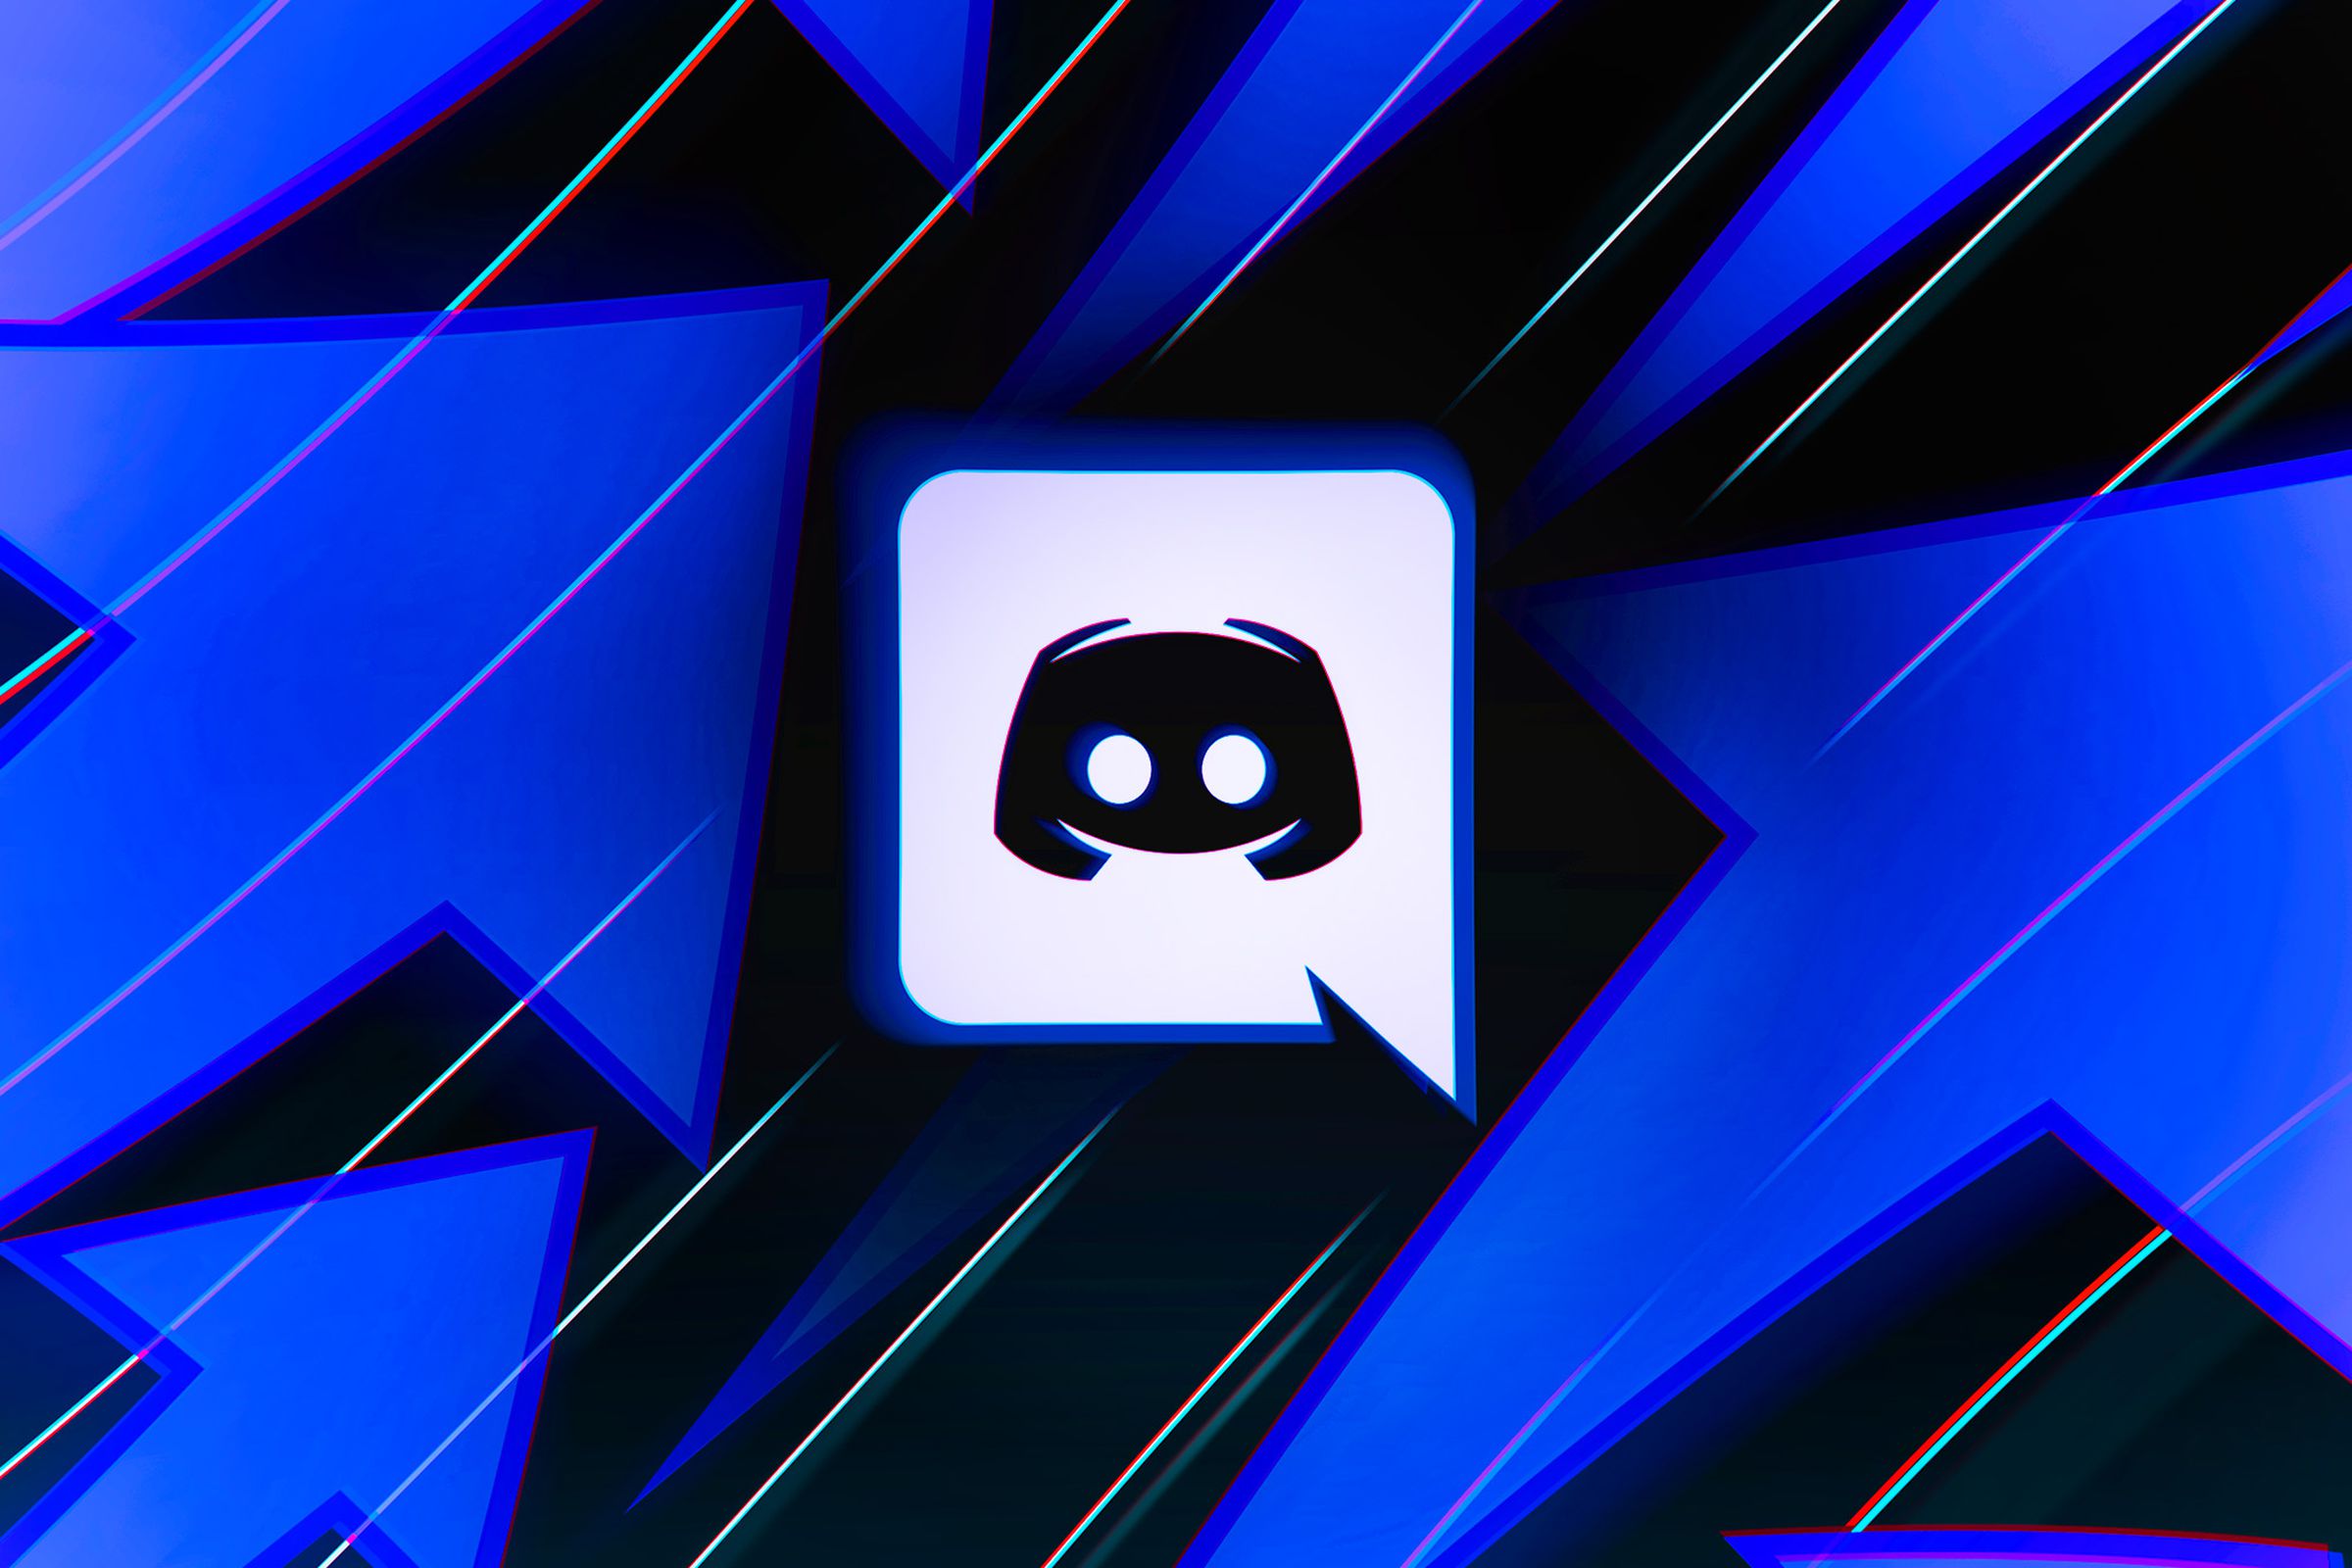 The Discord logo on a background of arrows going up.